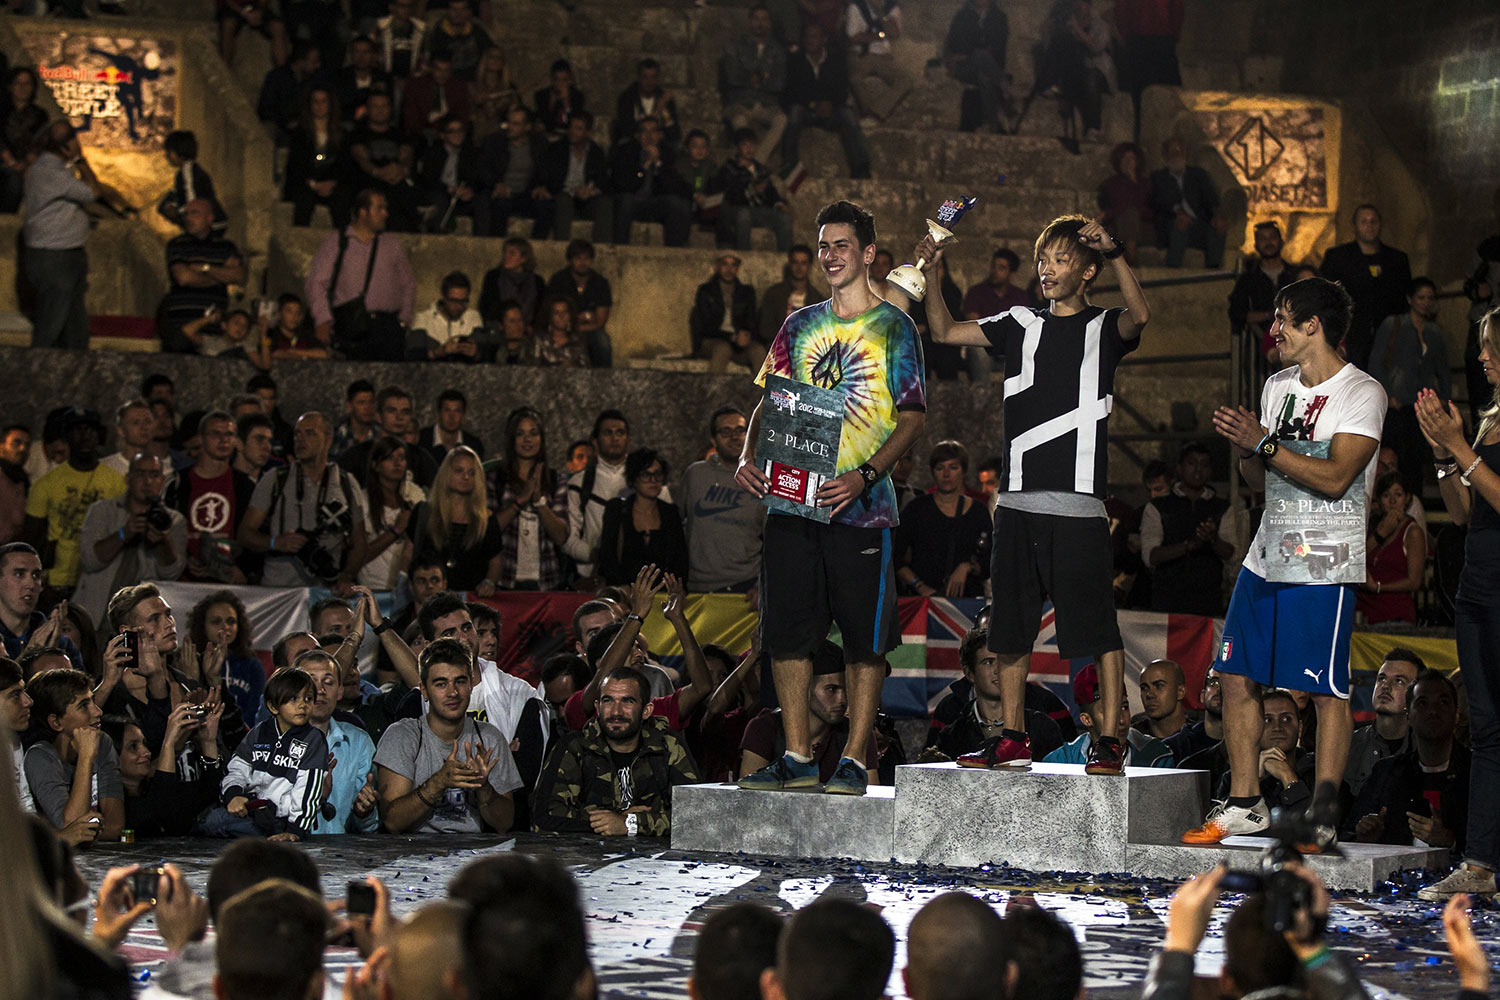 Kotaro Tokuda of Japan (first), Daniel Dennehy of Ireland (second) and Gunther Celli of Italy (third) celebrate during the prizegiving ceremony of the Red Bull Street Style World Final, Lecce, Italy on September 22nd 2012. // Damiano Levati/Red Bull Content Pool // P-20120923-00077 // Usage for editorial use only // Please go to www.redbullcontentpool.com for further information. //